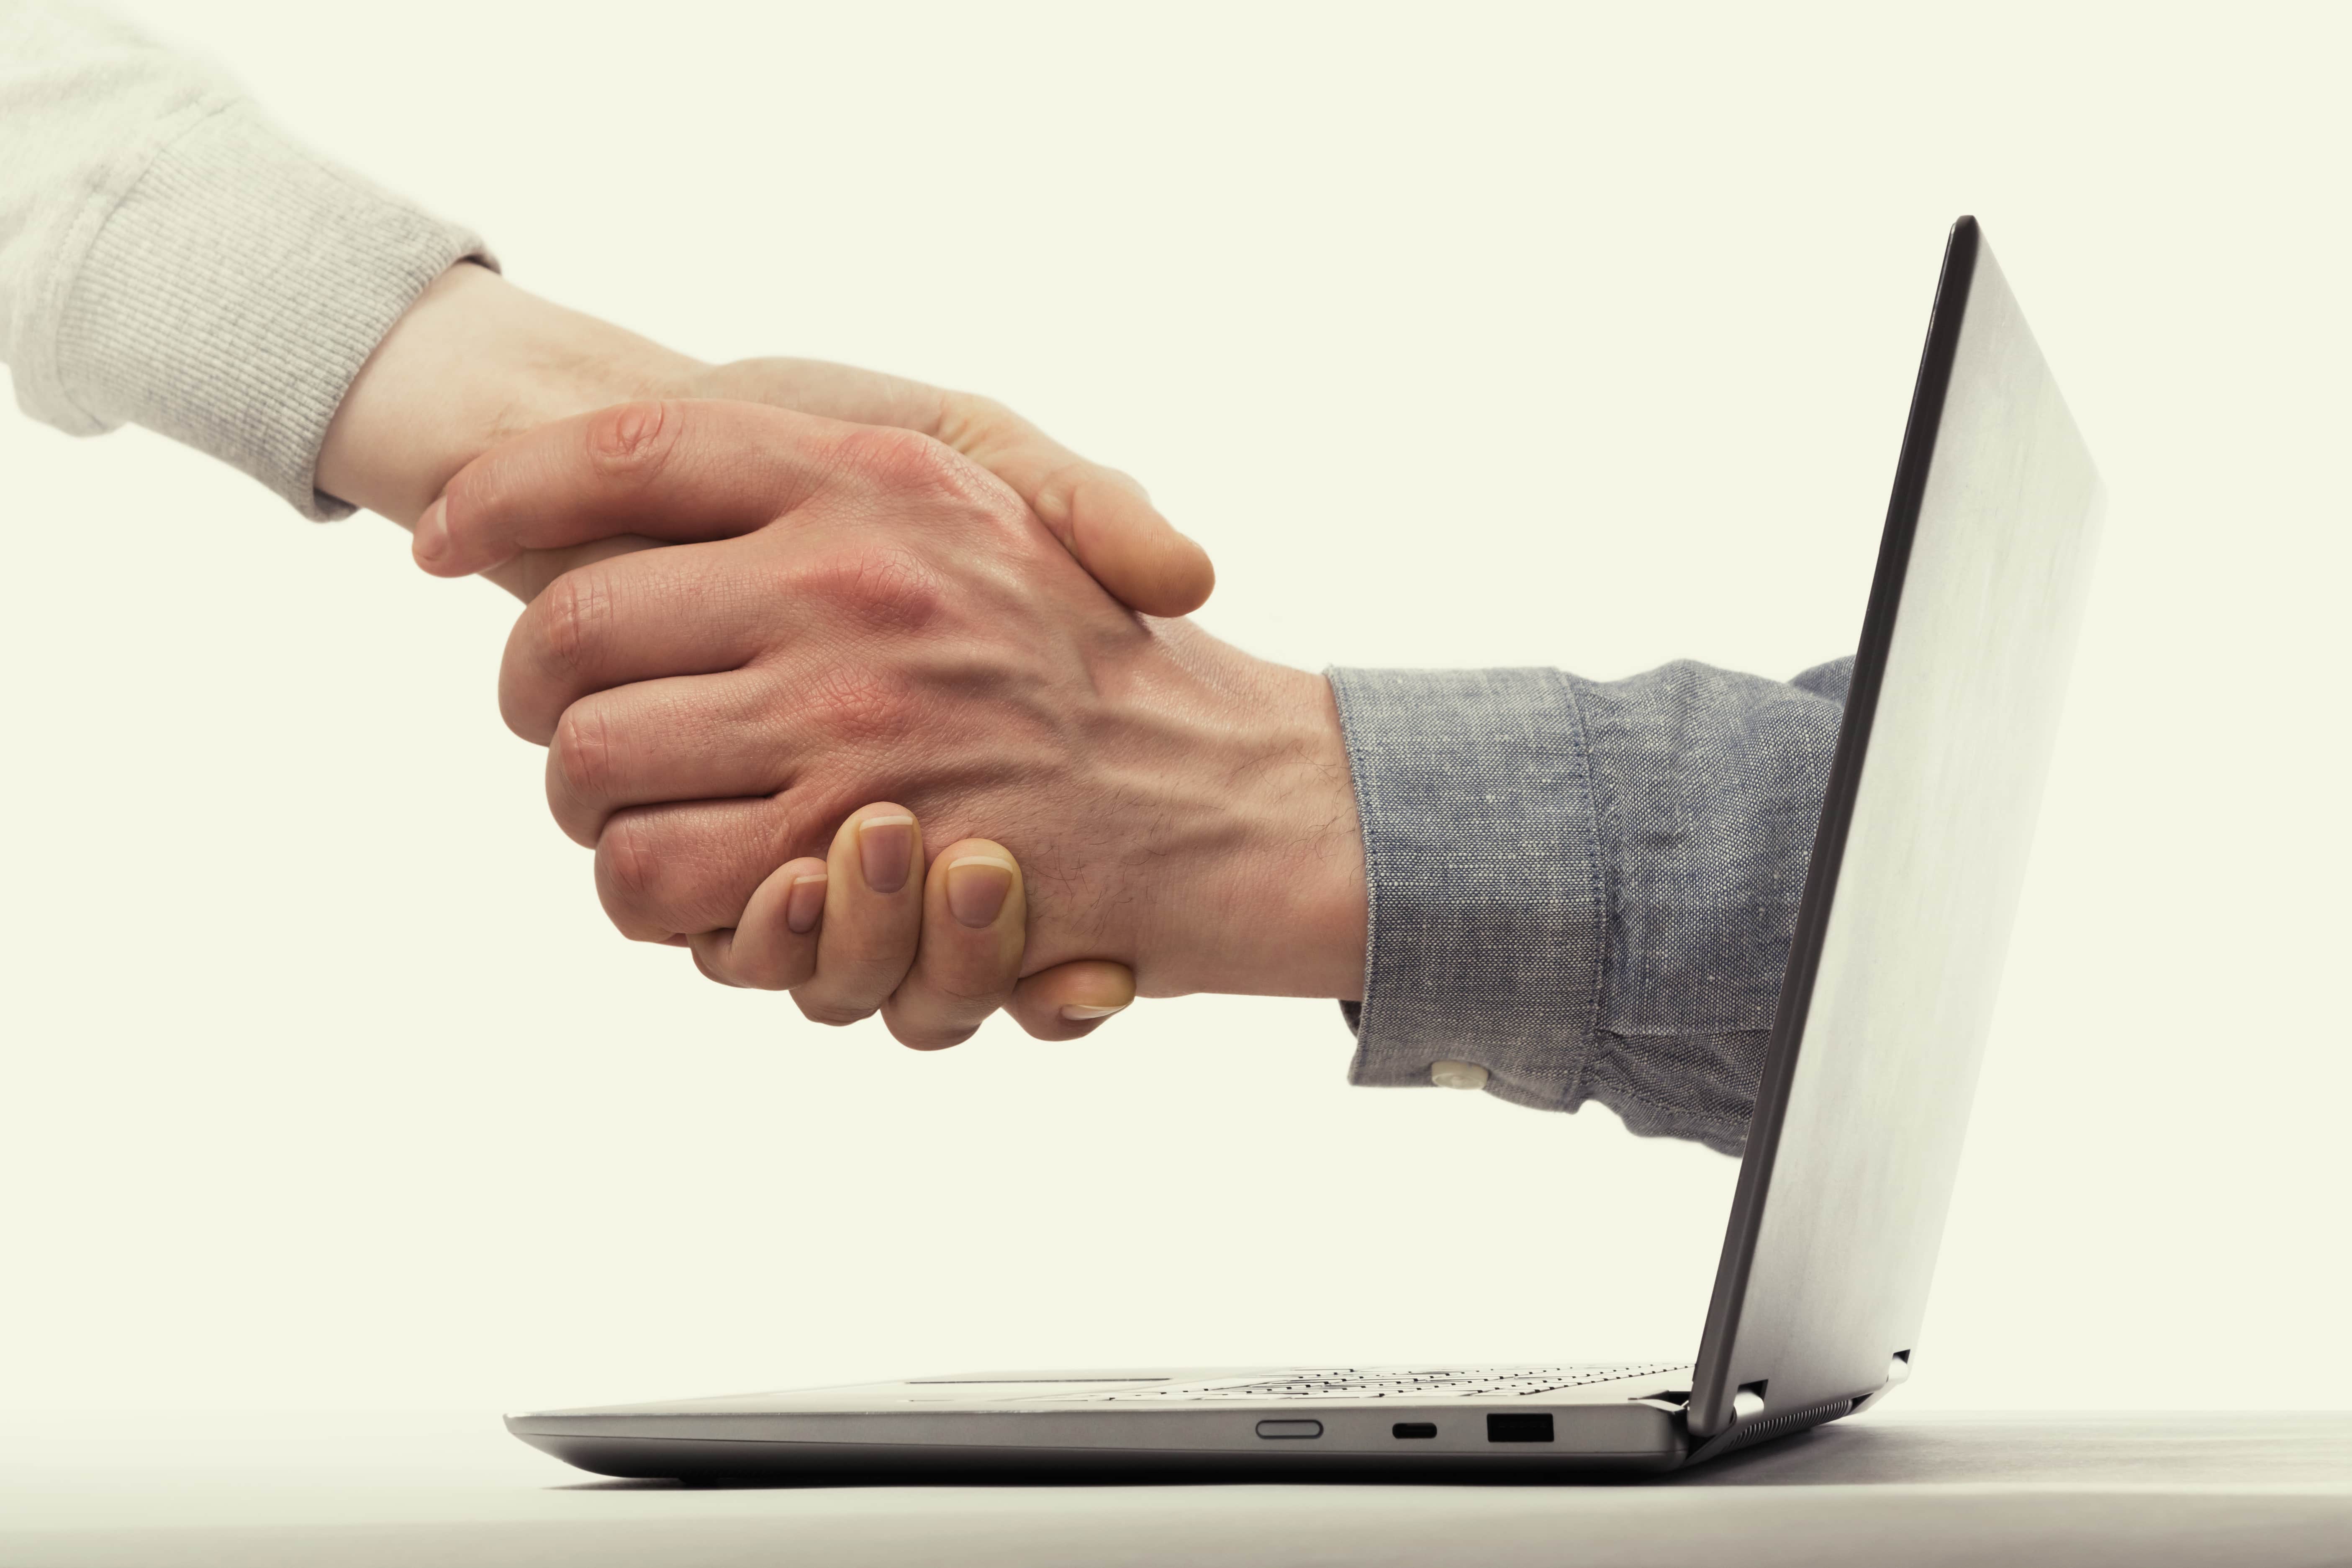 A hand emerging from a computer screen shaking another hand